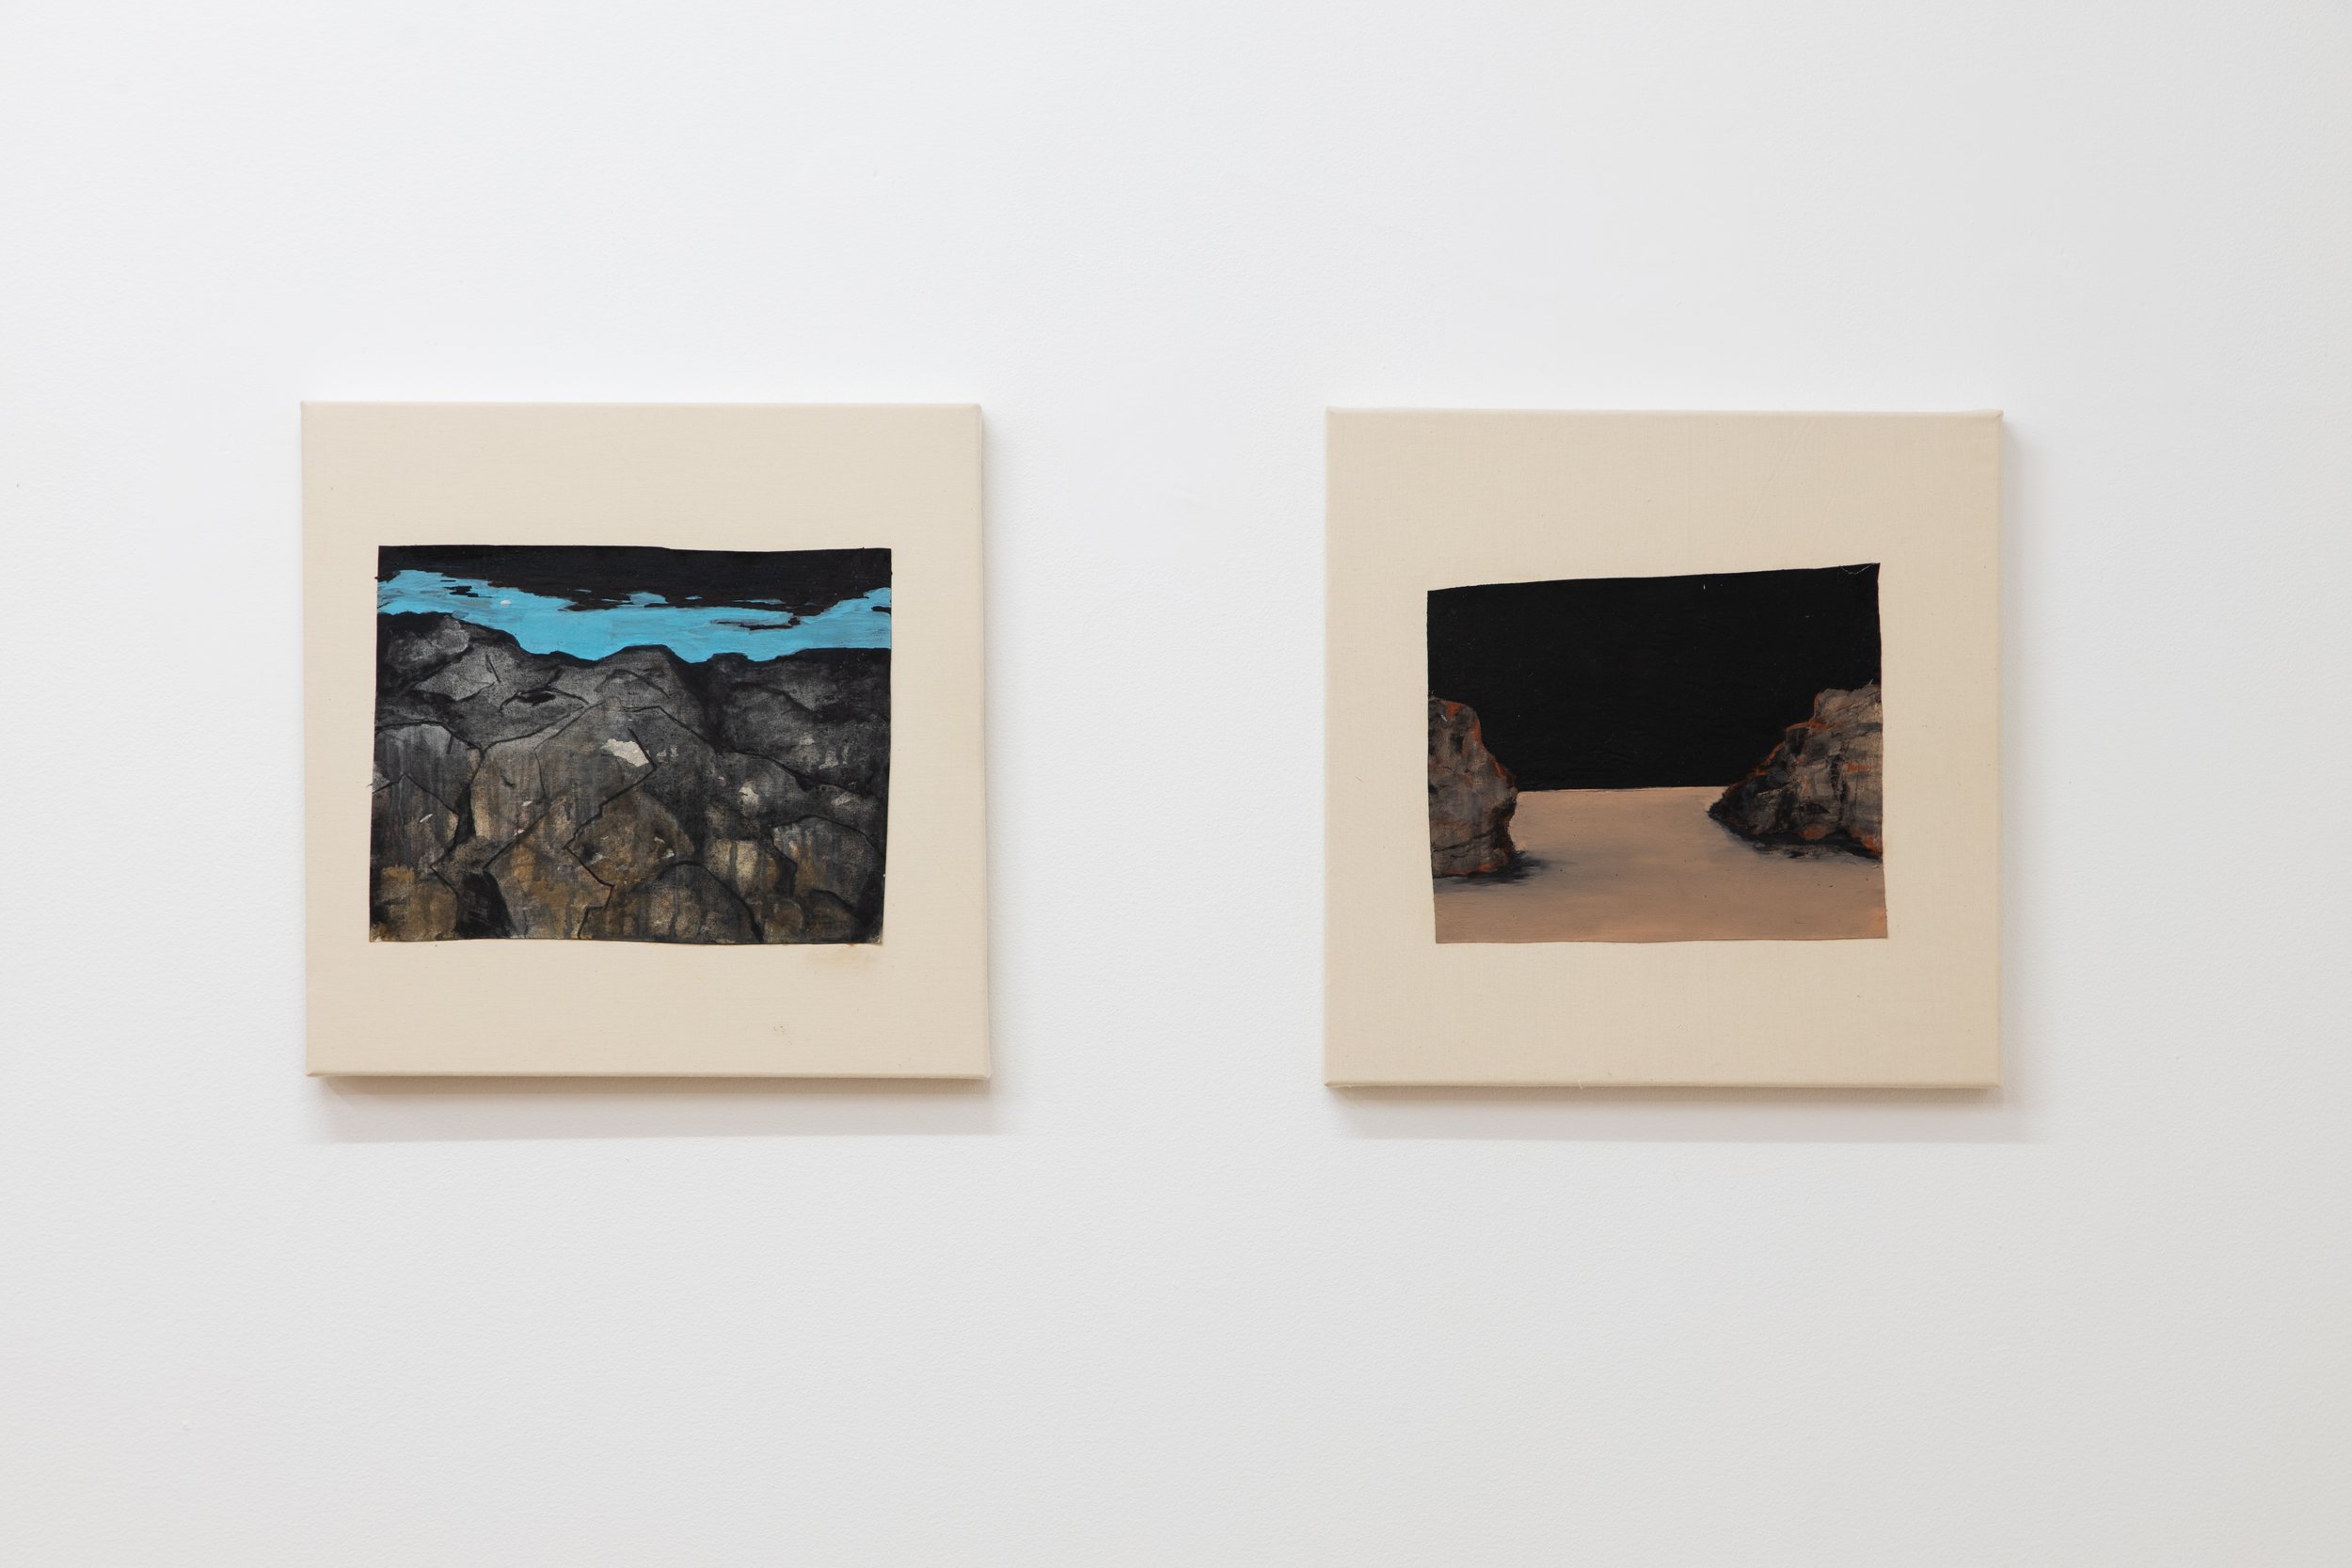  Installation view - The Cheating Hand of Randomness (2021). Two small-scale acrylic on canvas paintings. 25 x 21 cm each  (41 x 41 cm with frame).  